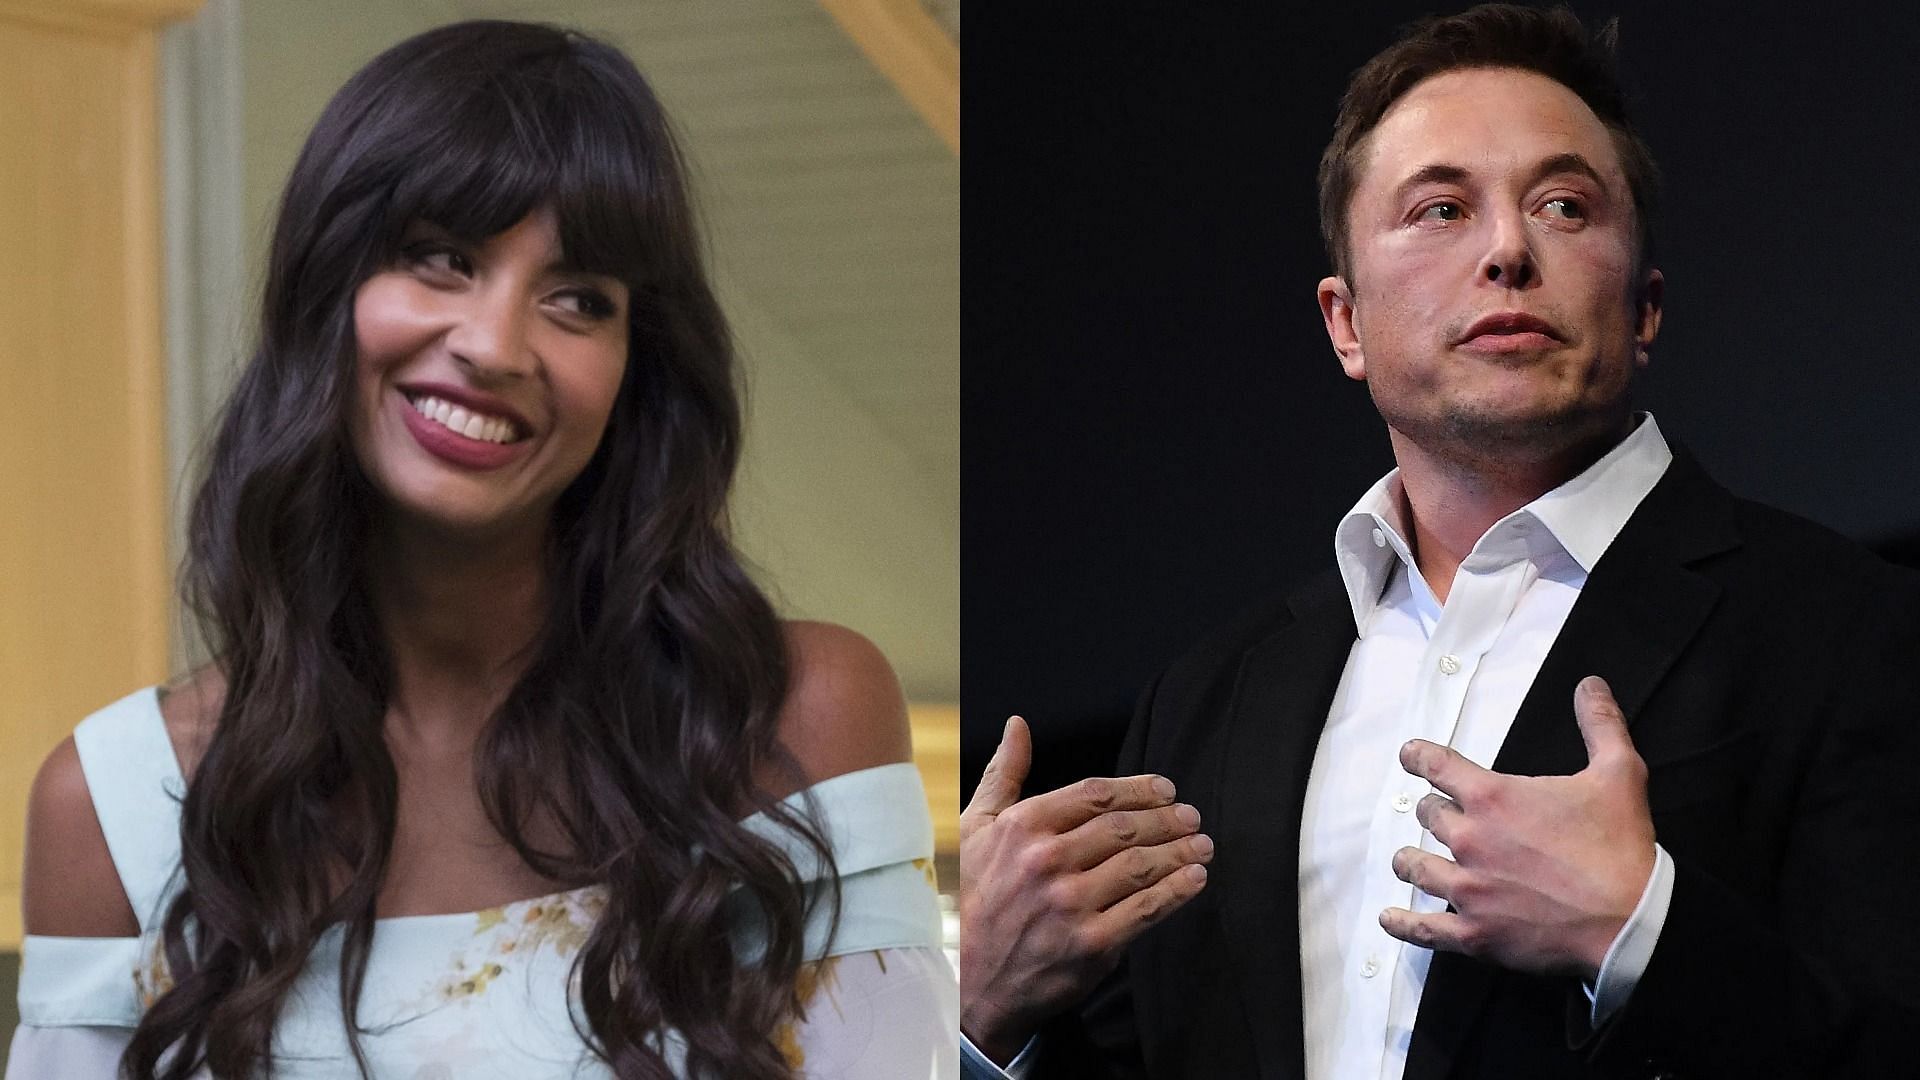 Jameela Jamil had previously stated that if Musk&#039;s purchase was successful, she would quit using the site. (Image via Getty Images/Colleen Hayes/Mark Brake)